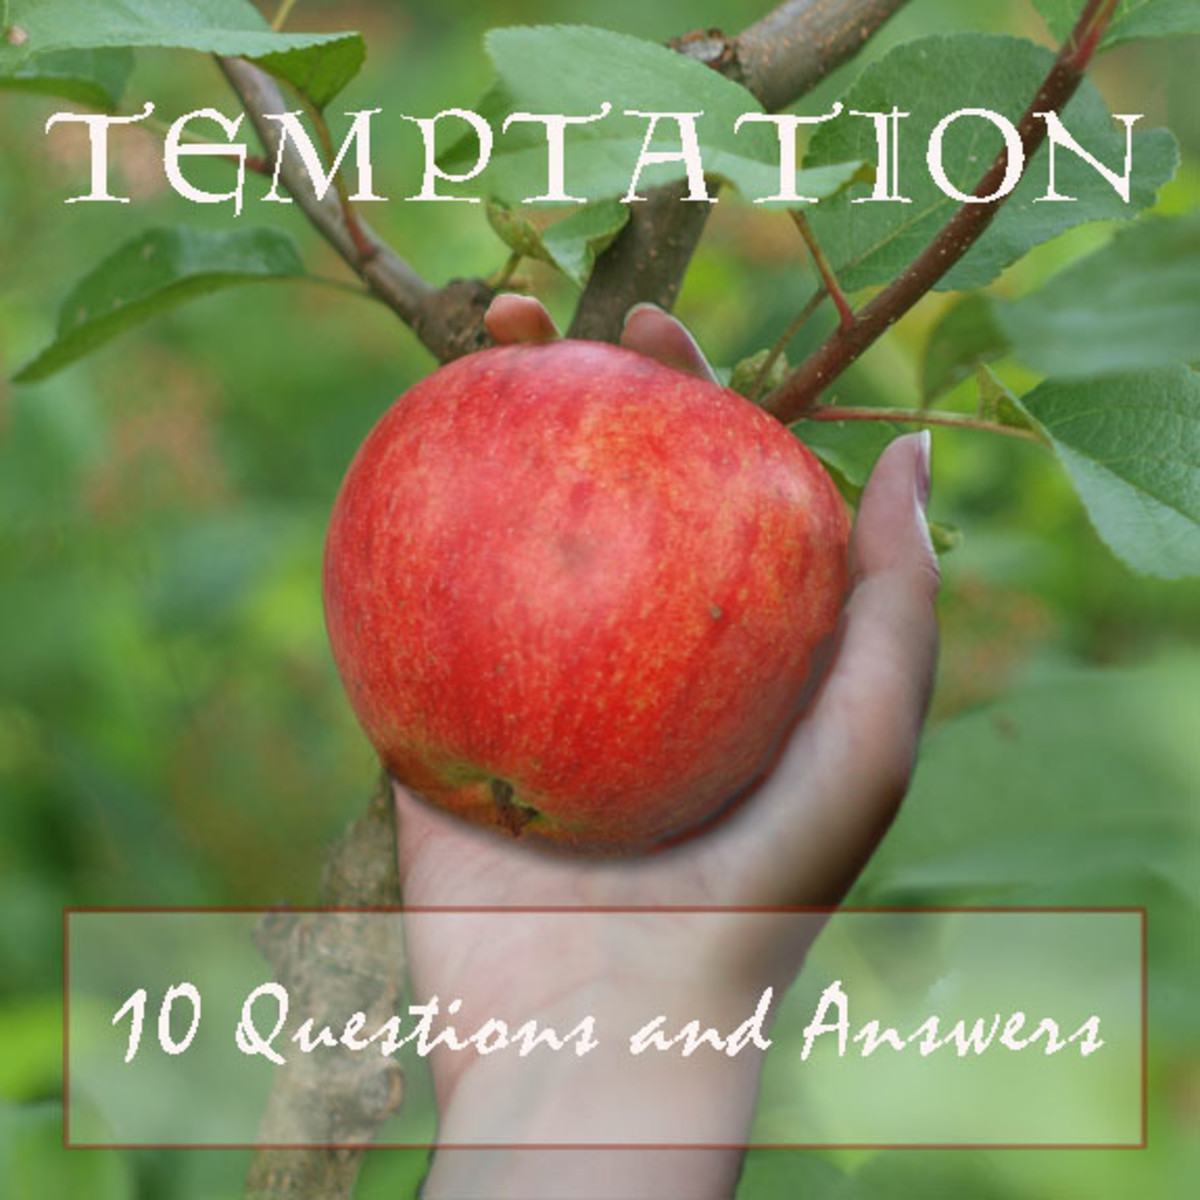 Read on to discover helpful answers to common questions about temptation.